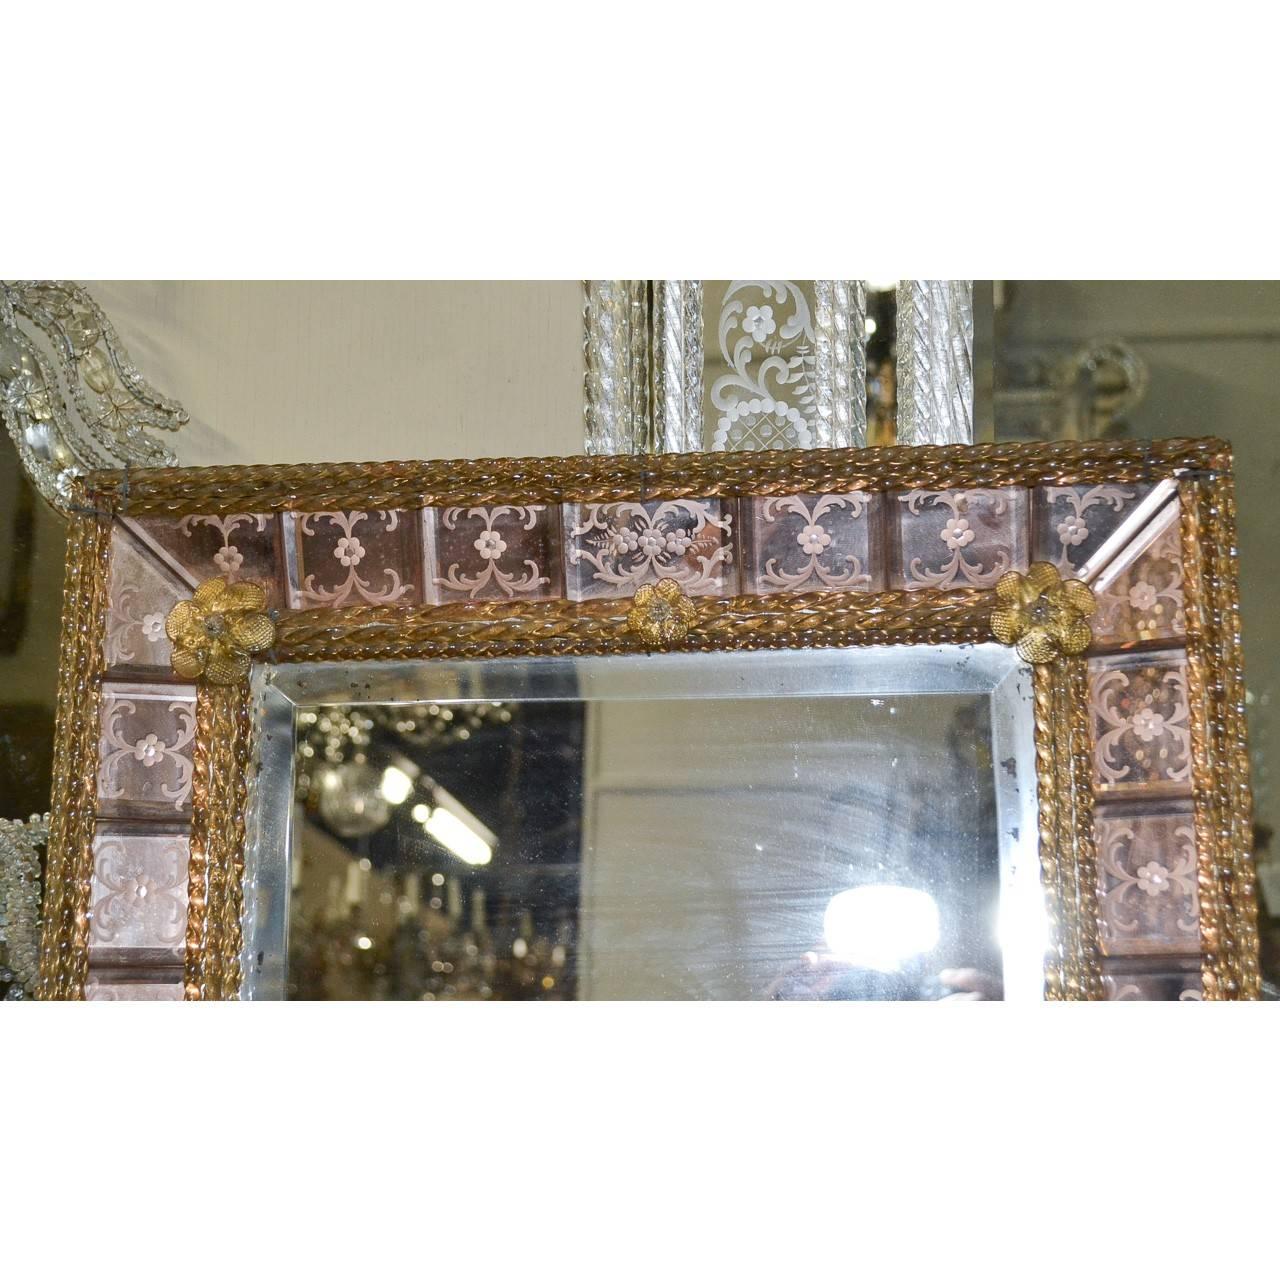 Gorgeous pink handmade Italian Venetian etched mirror.
The bottom pegs can be easily removed,
circa 1920.